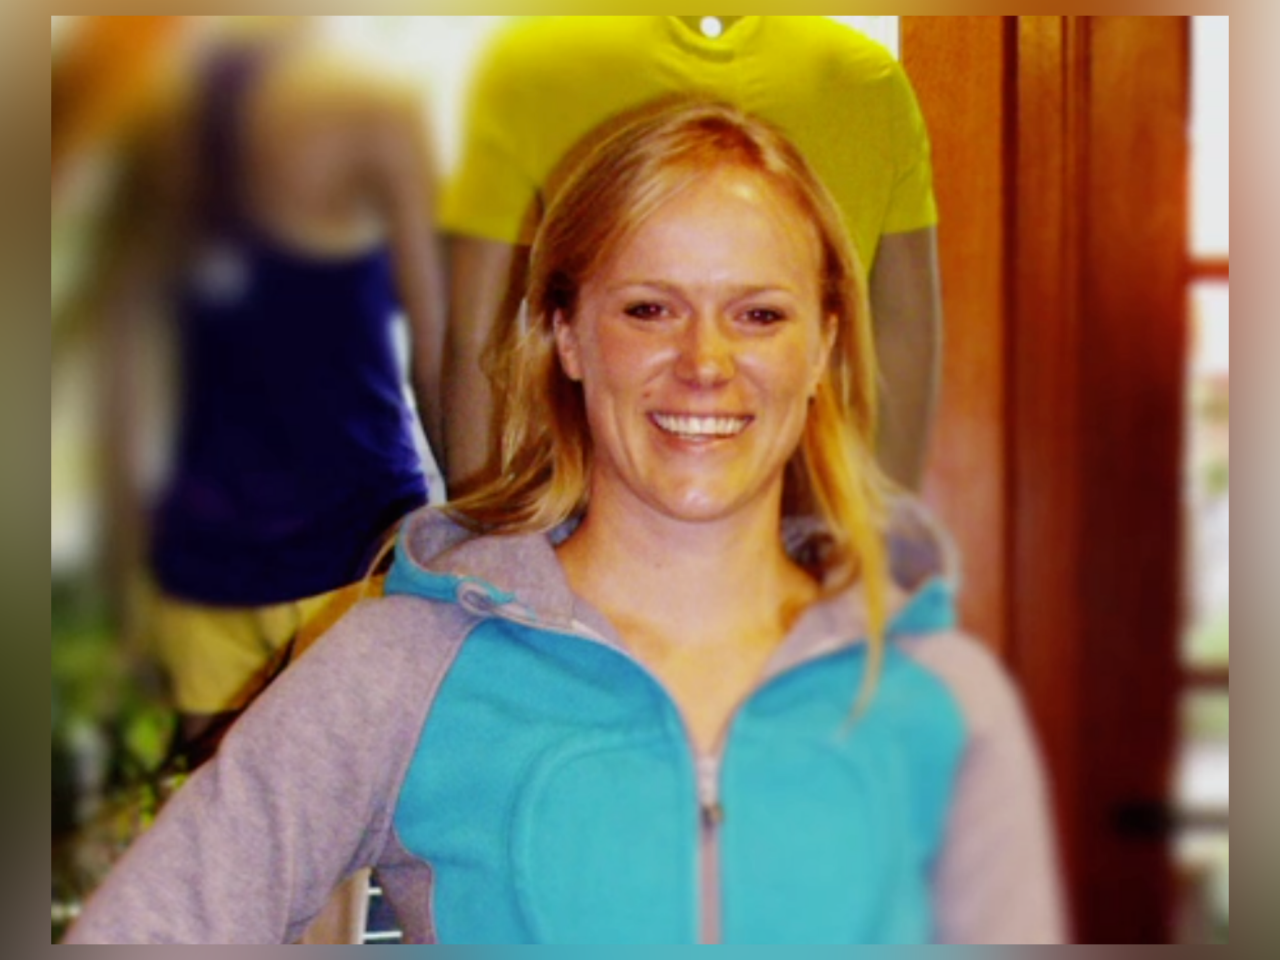 Lululemon Murder: Store Employee Suffered Over 300 Blows In Fatal